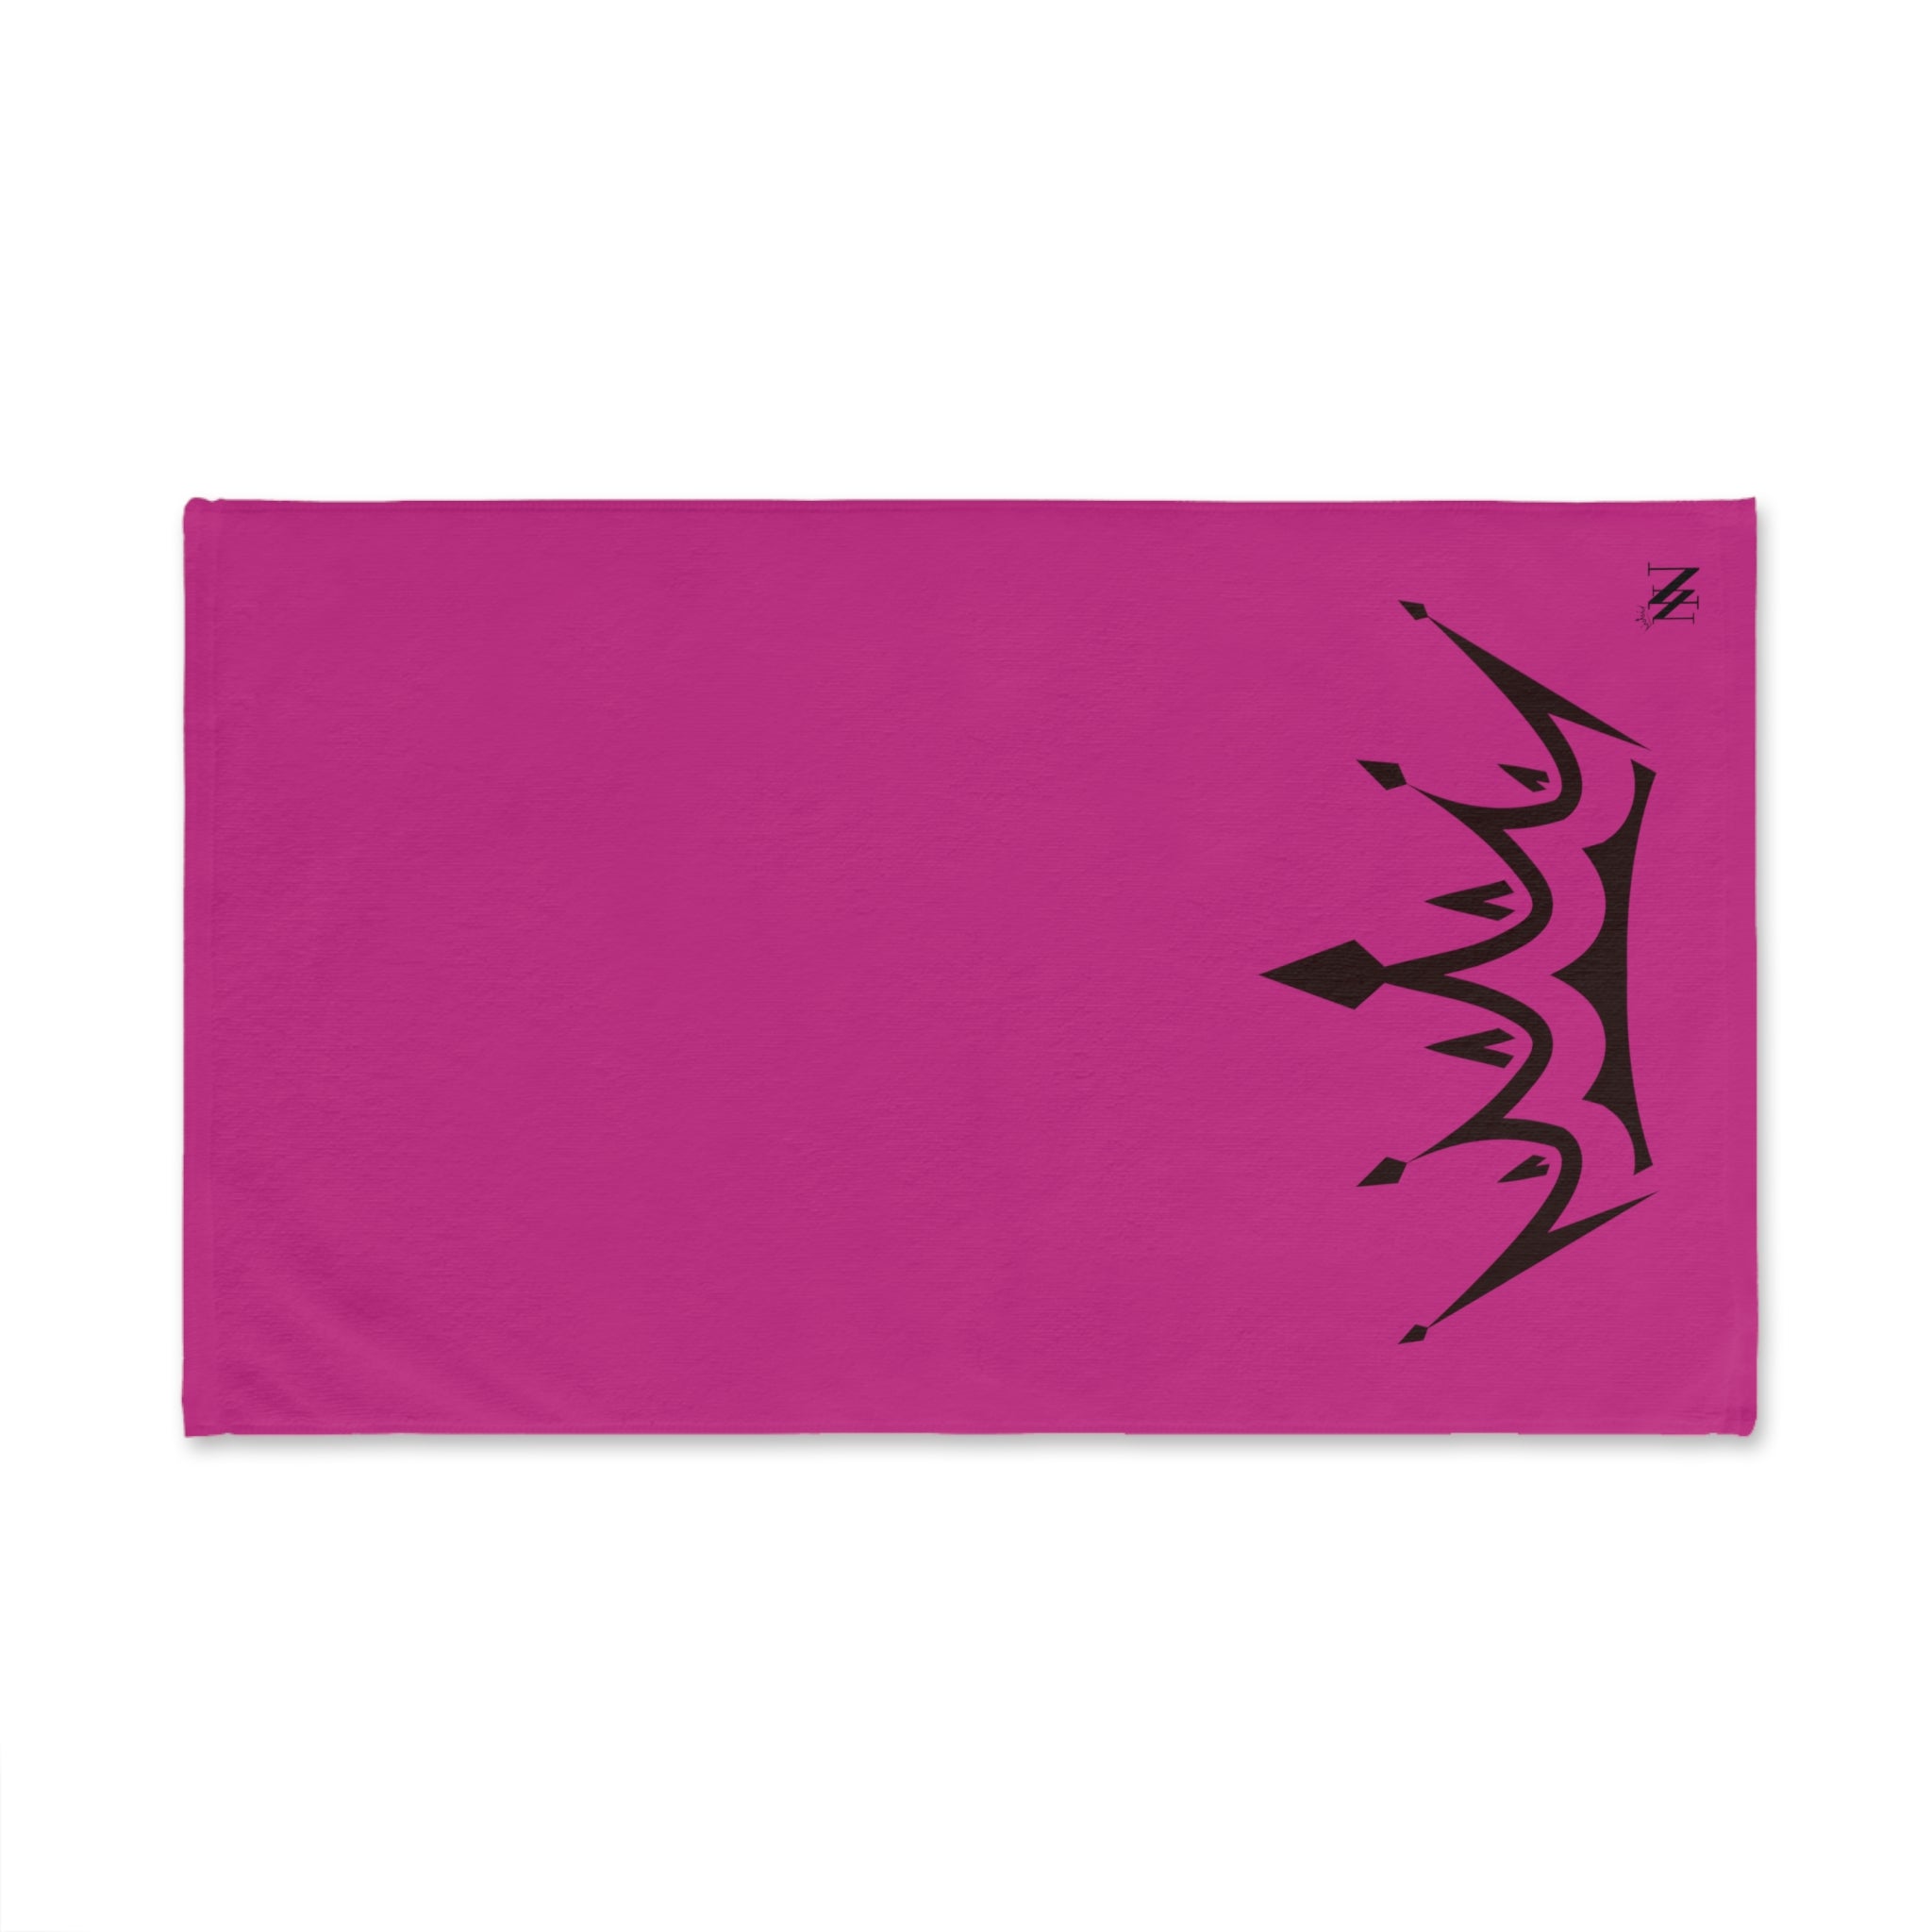 Black Crown Fuscia | Funny Gifts for Men - Gifts for Him - Birthday Gifts for Men, Him, Husband, Boyfriend, New Couple Gifts, Fathers & Valentines Day Gifts, Hand Towels NECTAR NAPKINS